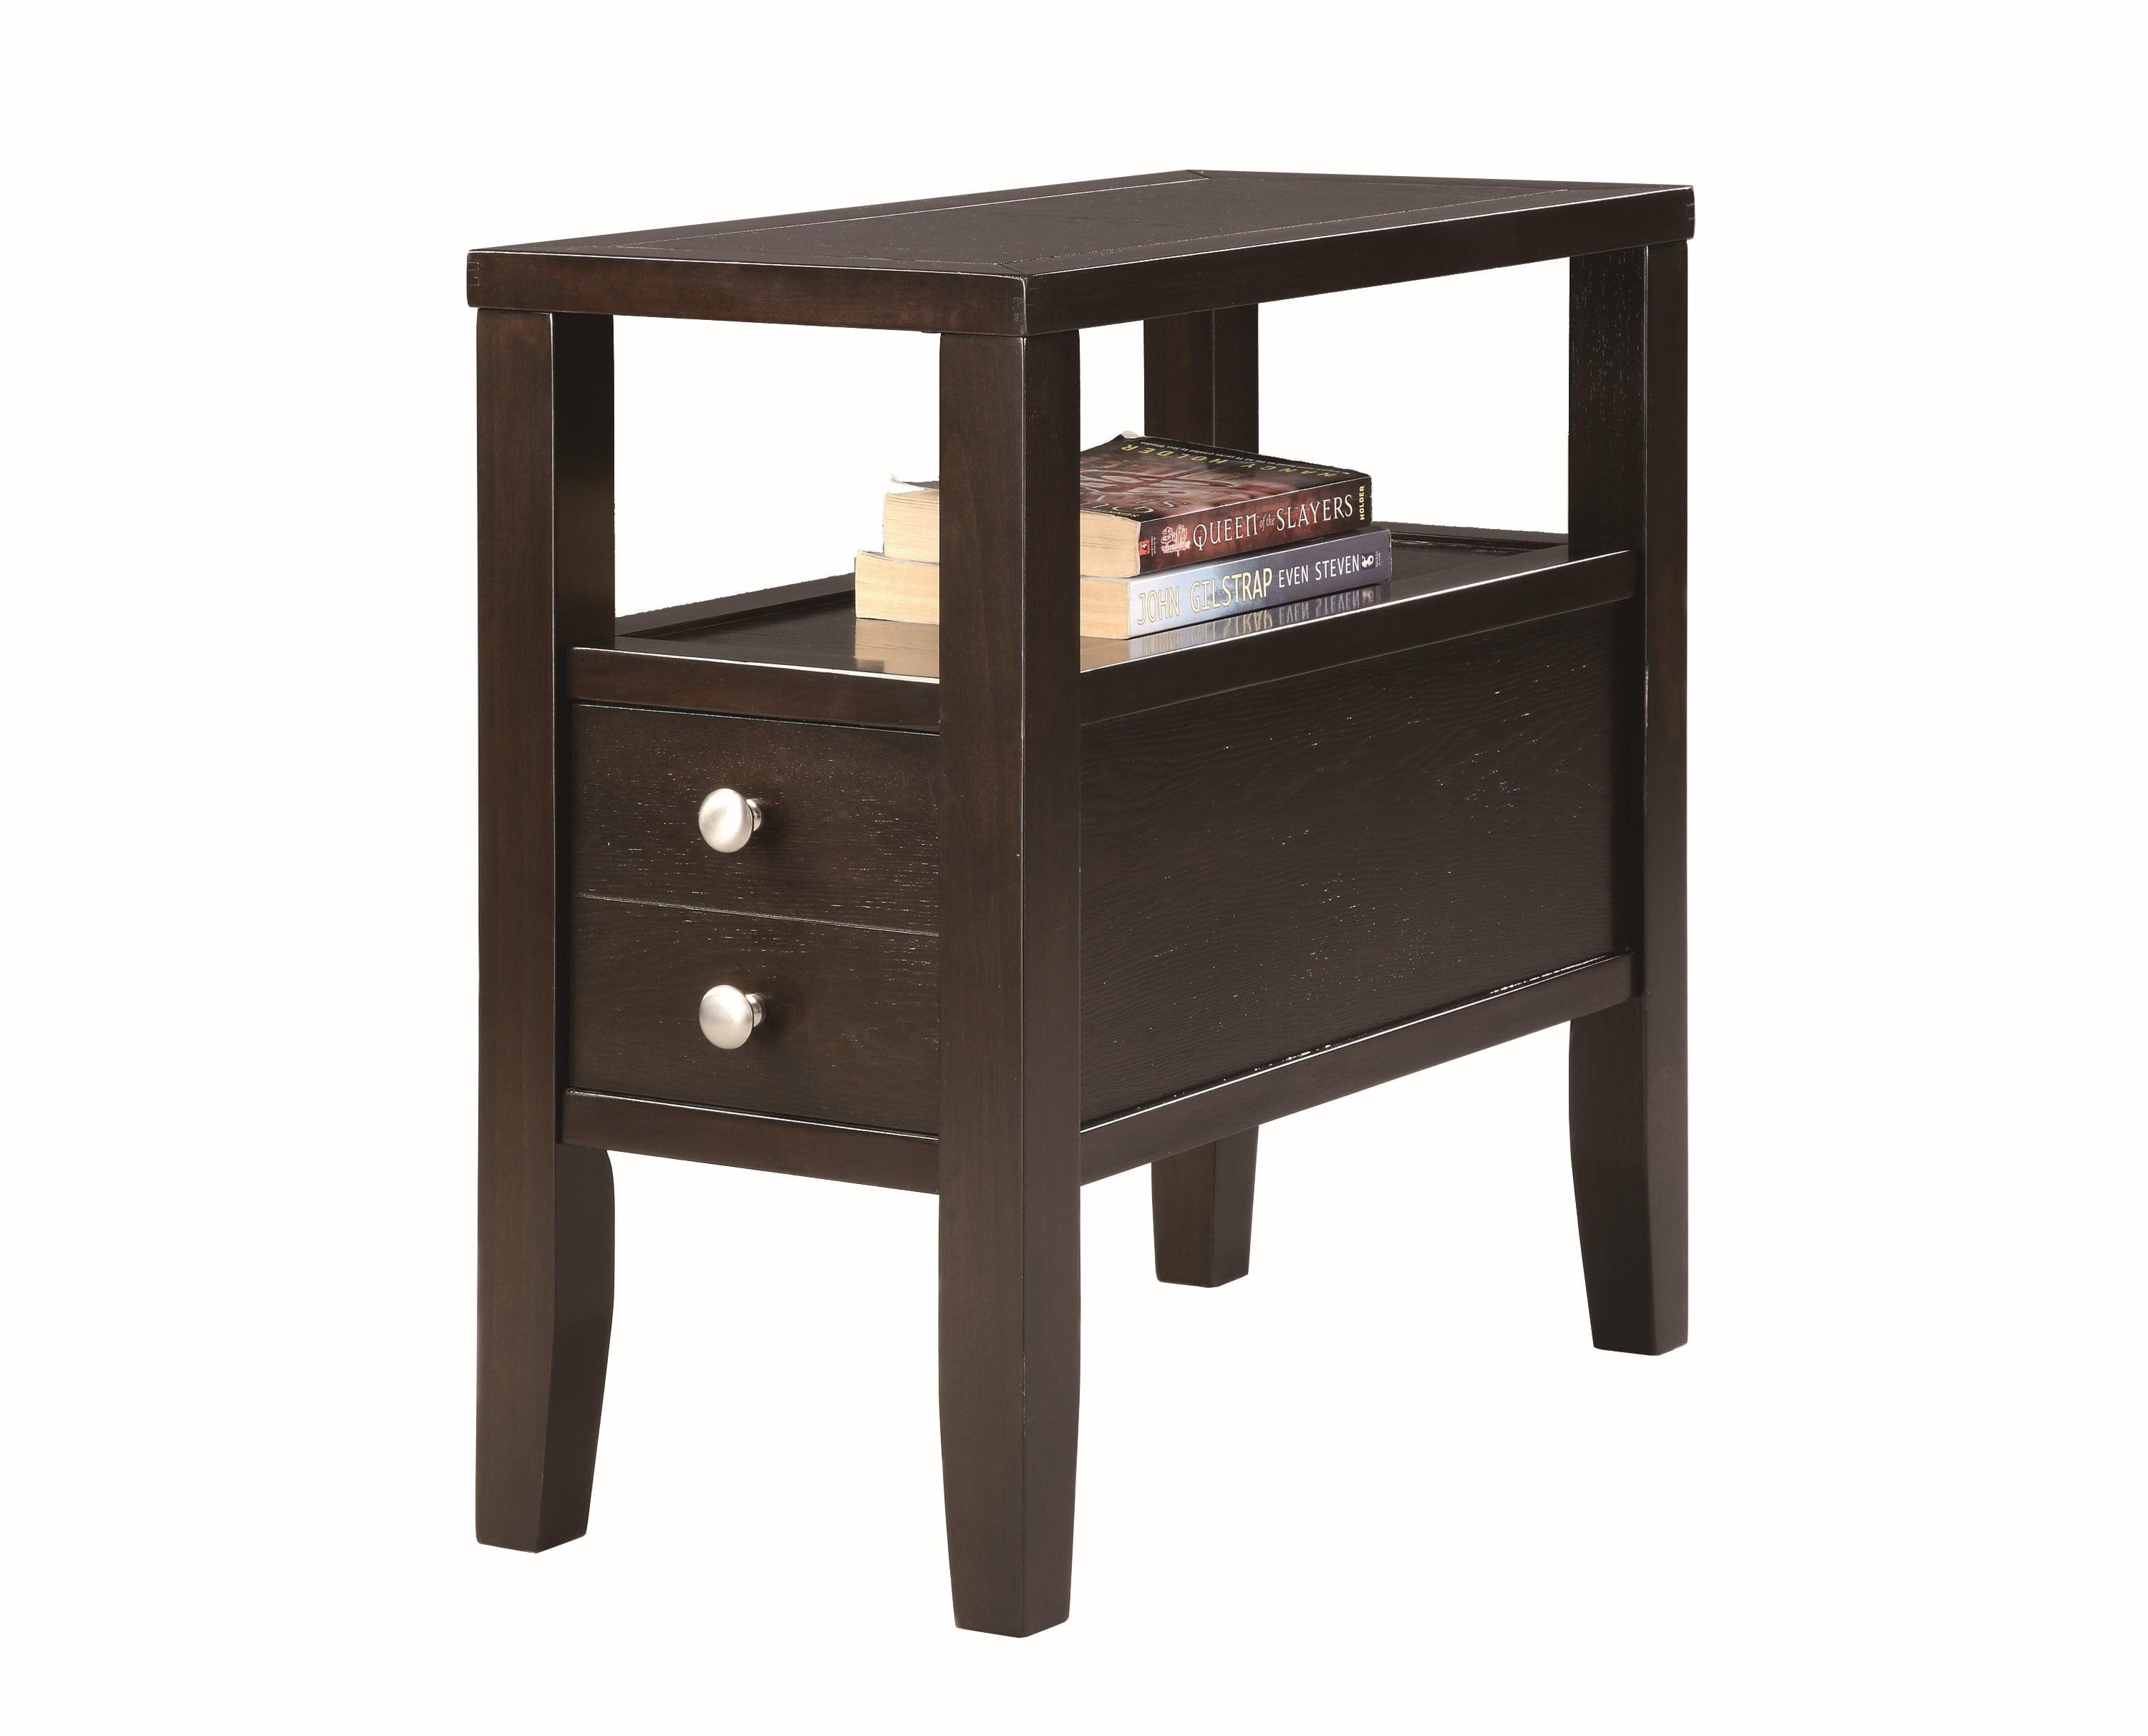 Contemporary Espresso Chairside Table with Storage and Shelf